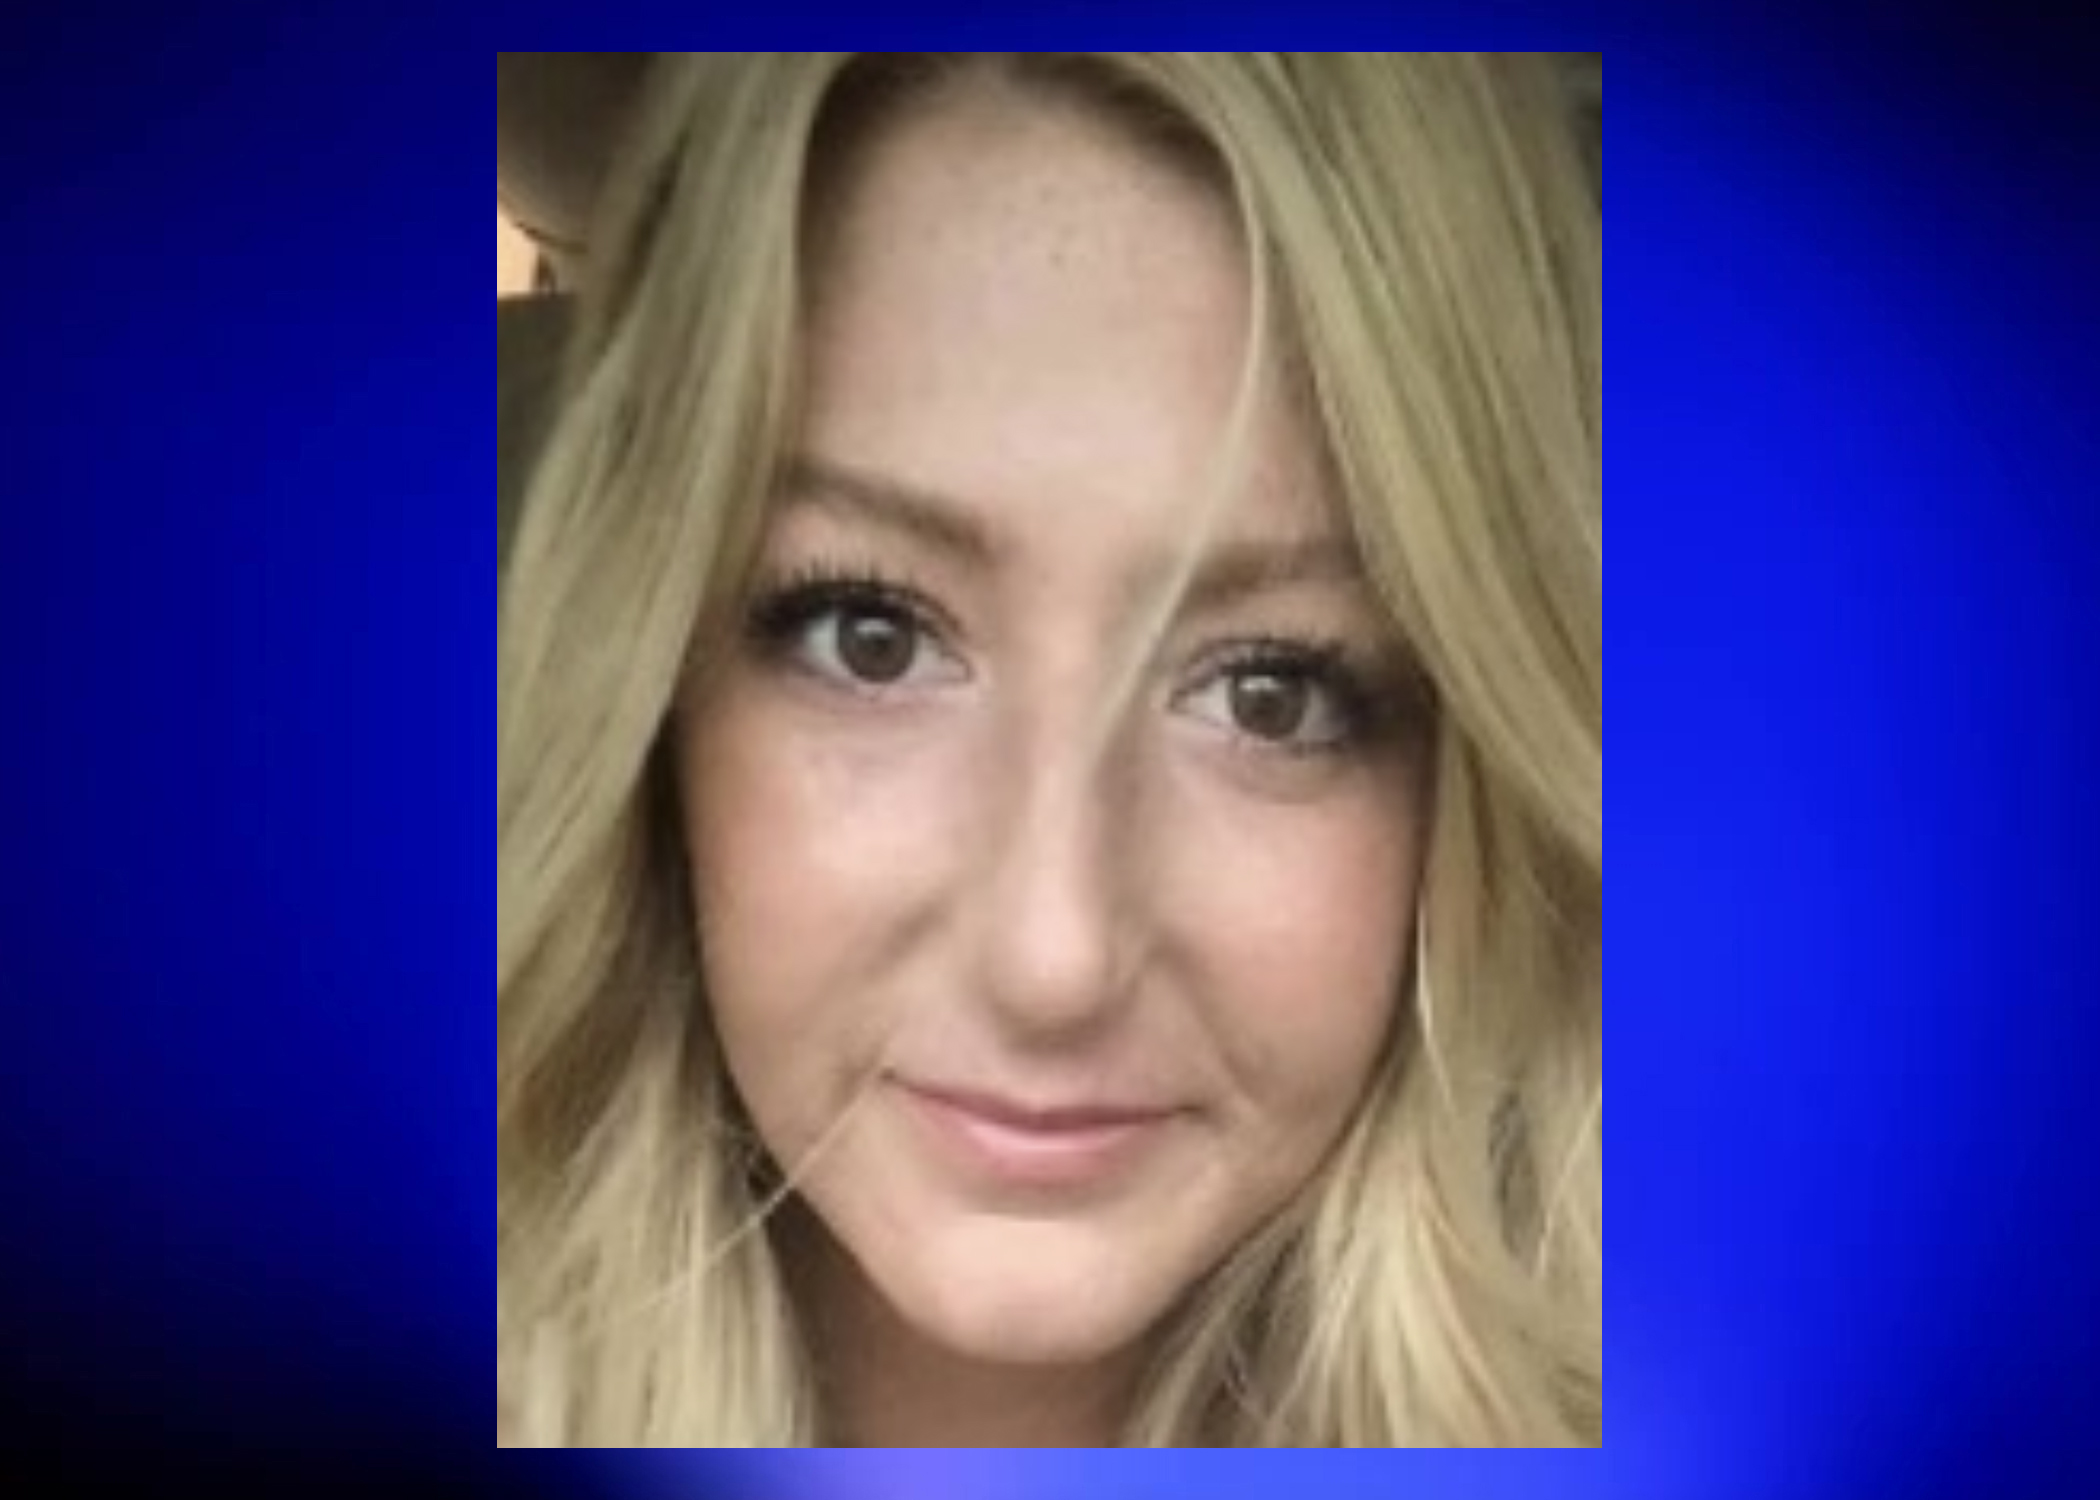 Missing and Endangered Person Alert issued for 29-year-old Alabama woman